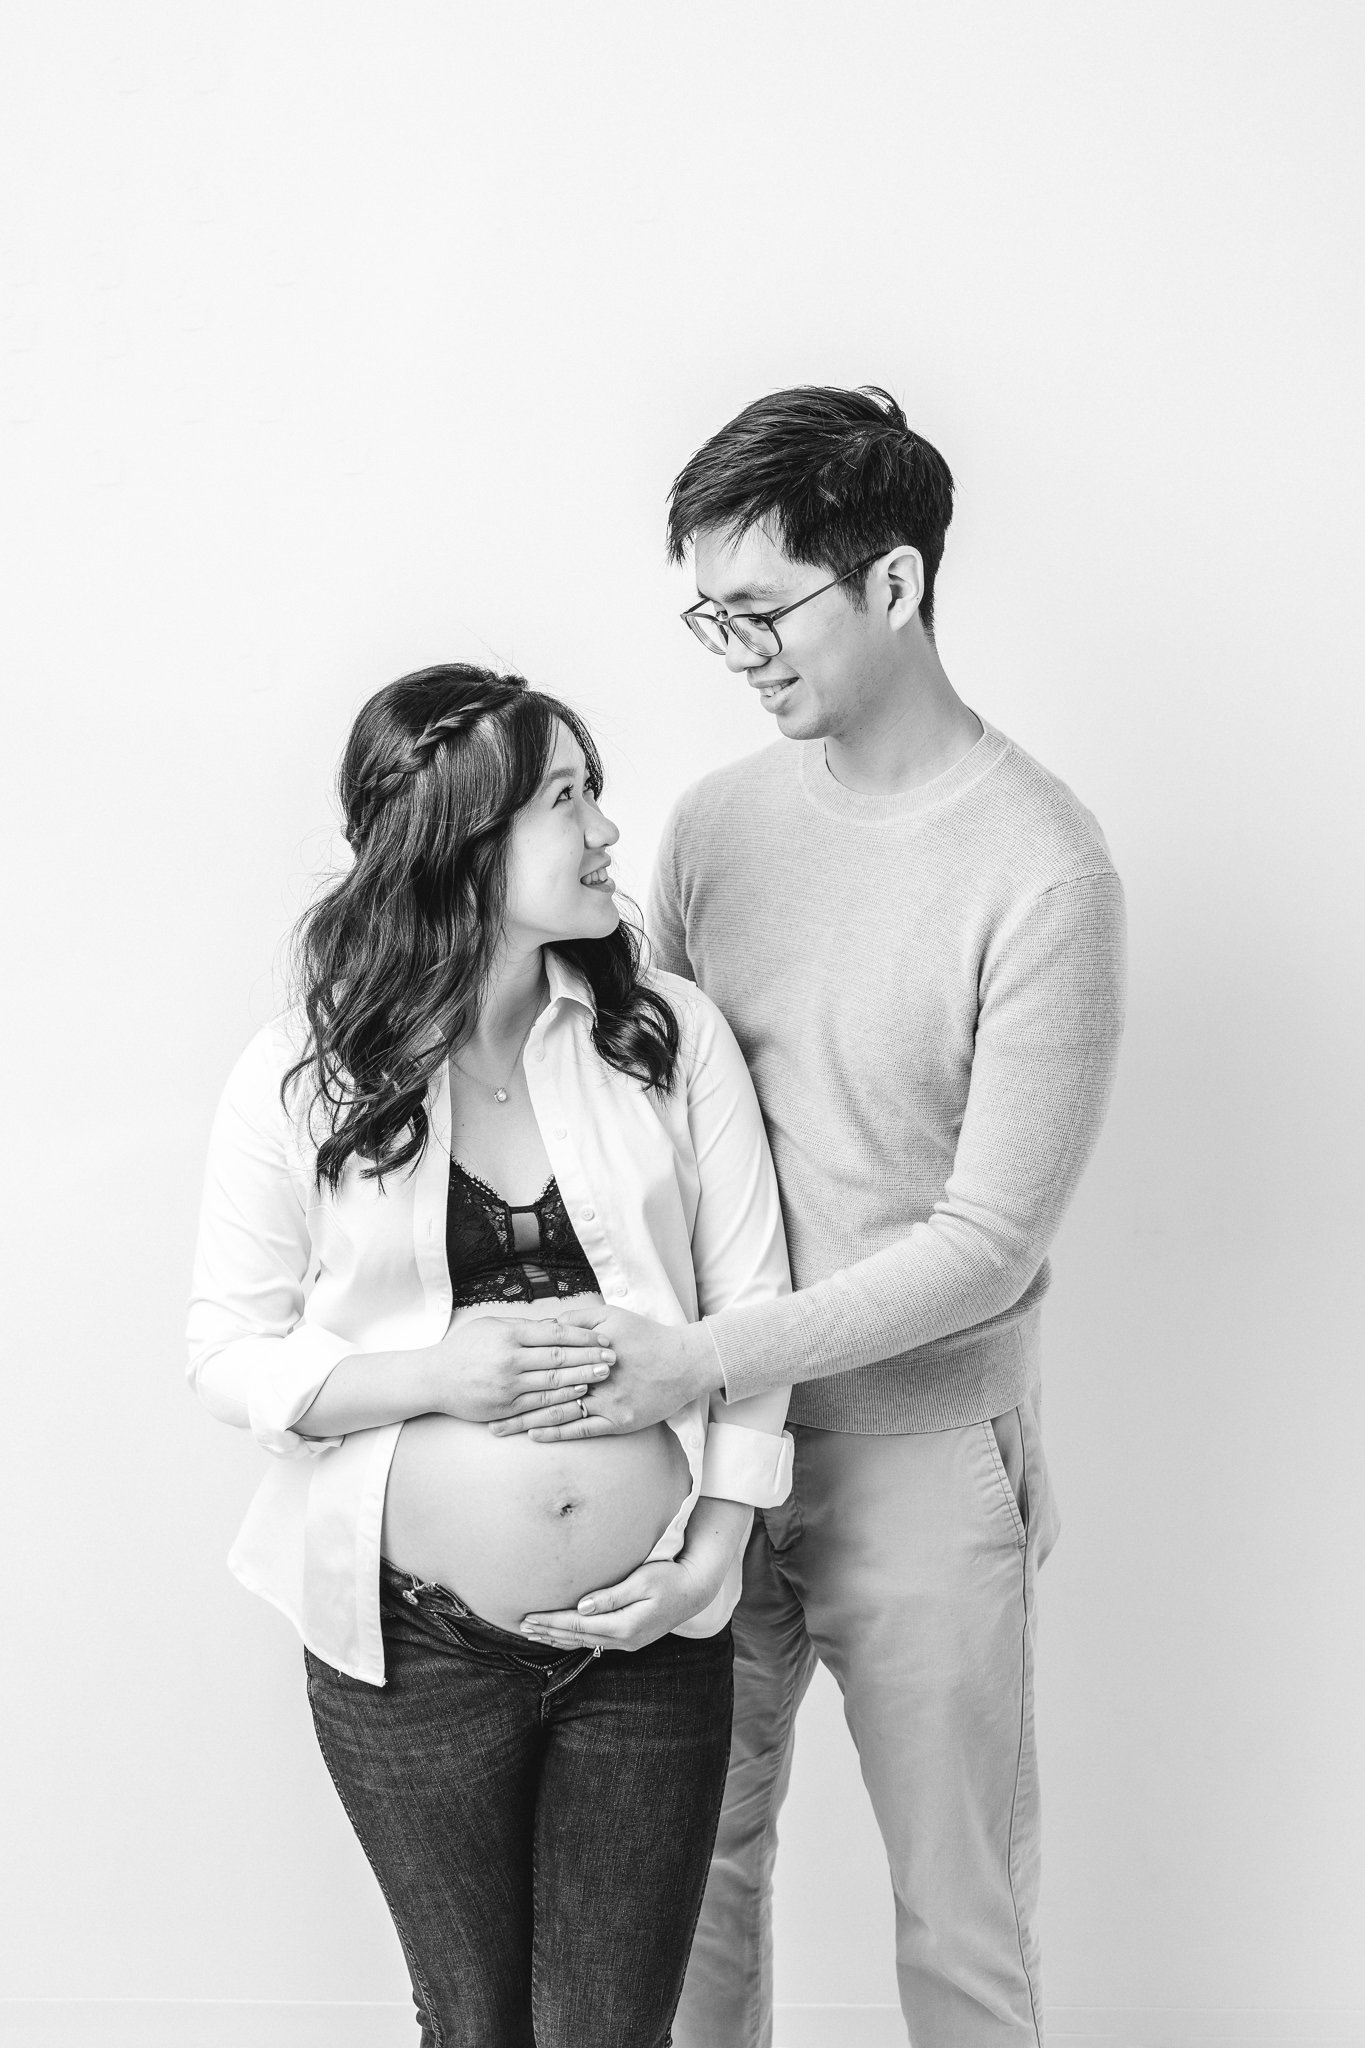  Husband and wife look lovingly at one another while both feel the baby in the womb by Nicole Hawkins Photography. husband and wife ready for baby #NicoleHawkinsPhotography #NicoleHawkinsMaternity #MaternityPhotography #Maternitystyle #NJMaternity #T